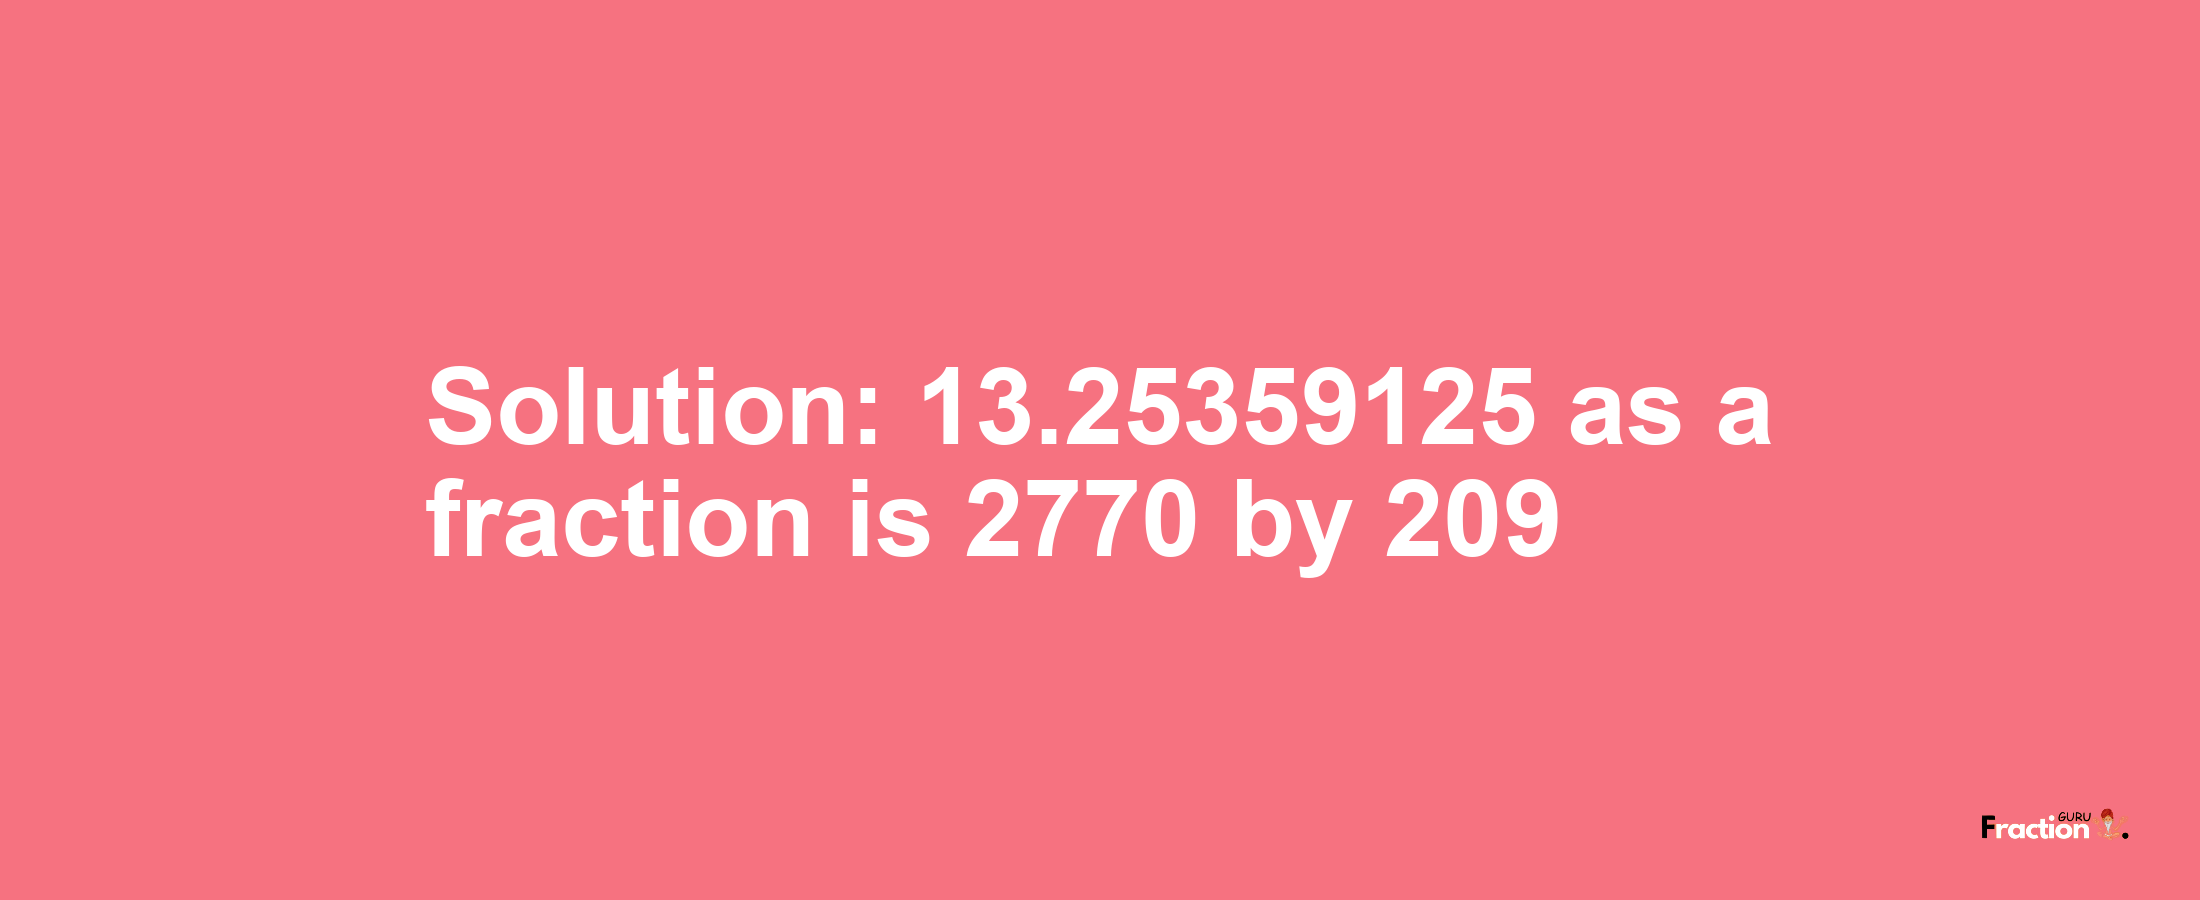 Solution:13.25359125 as a fraction is 2770/209